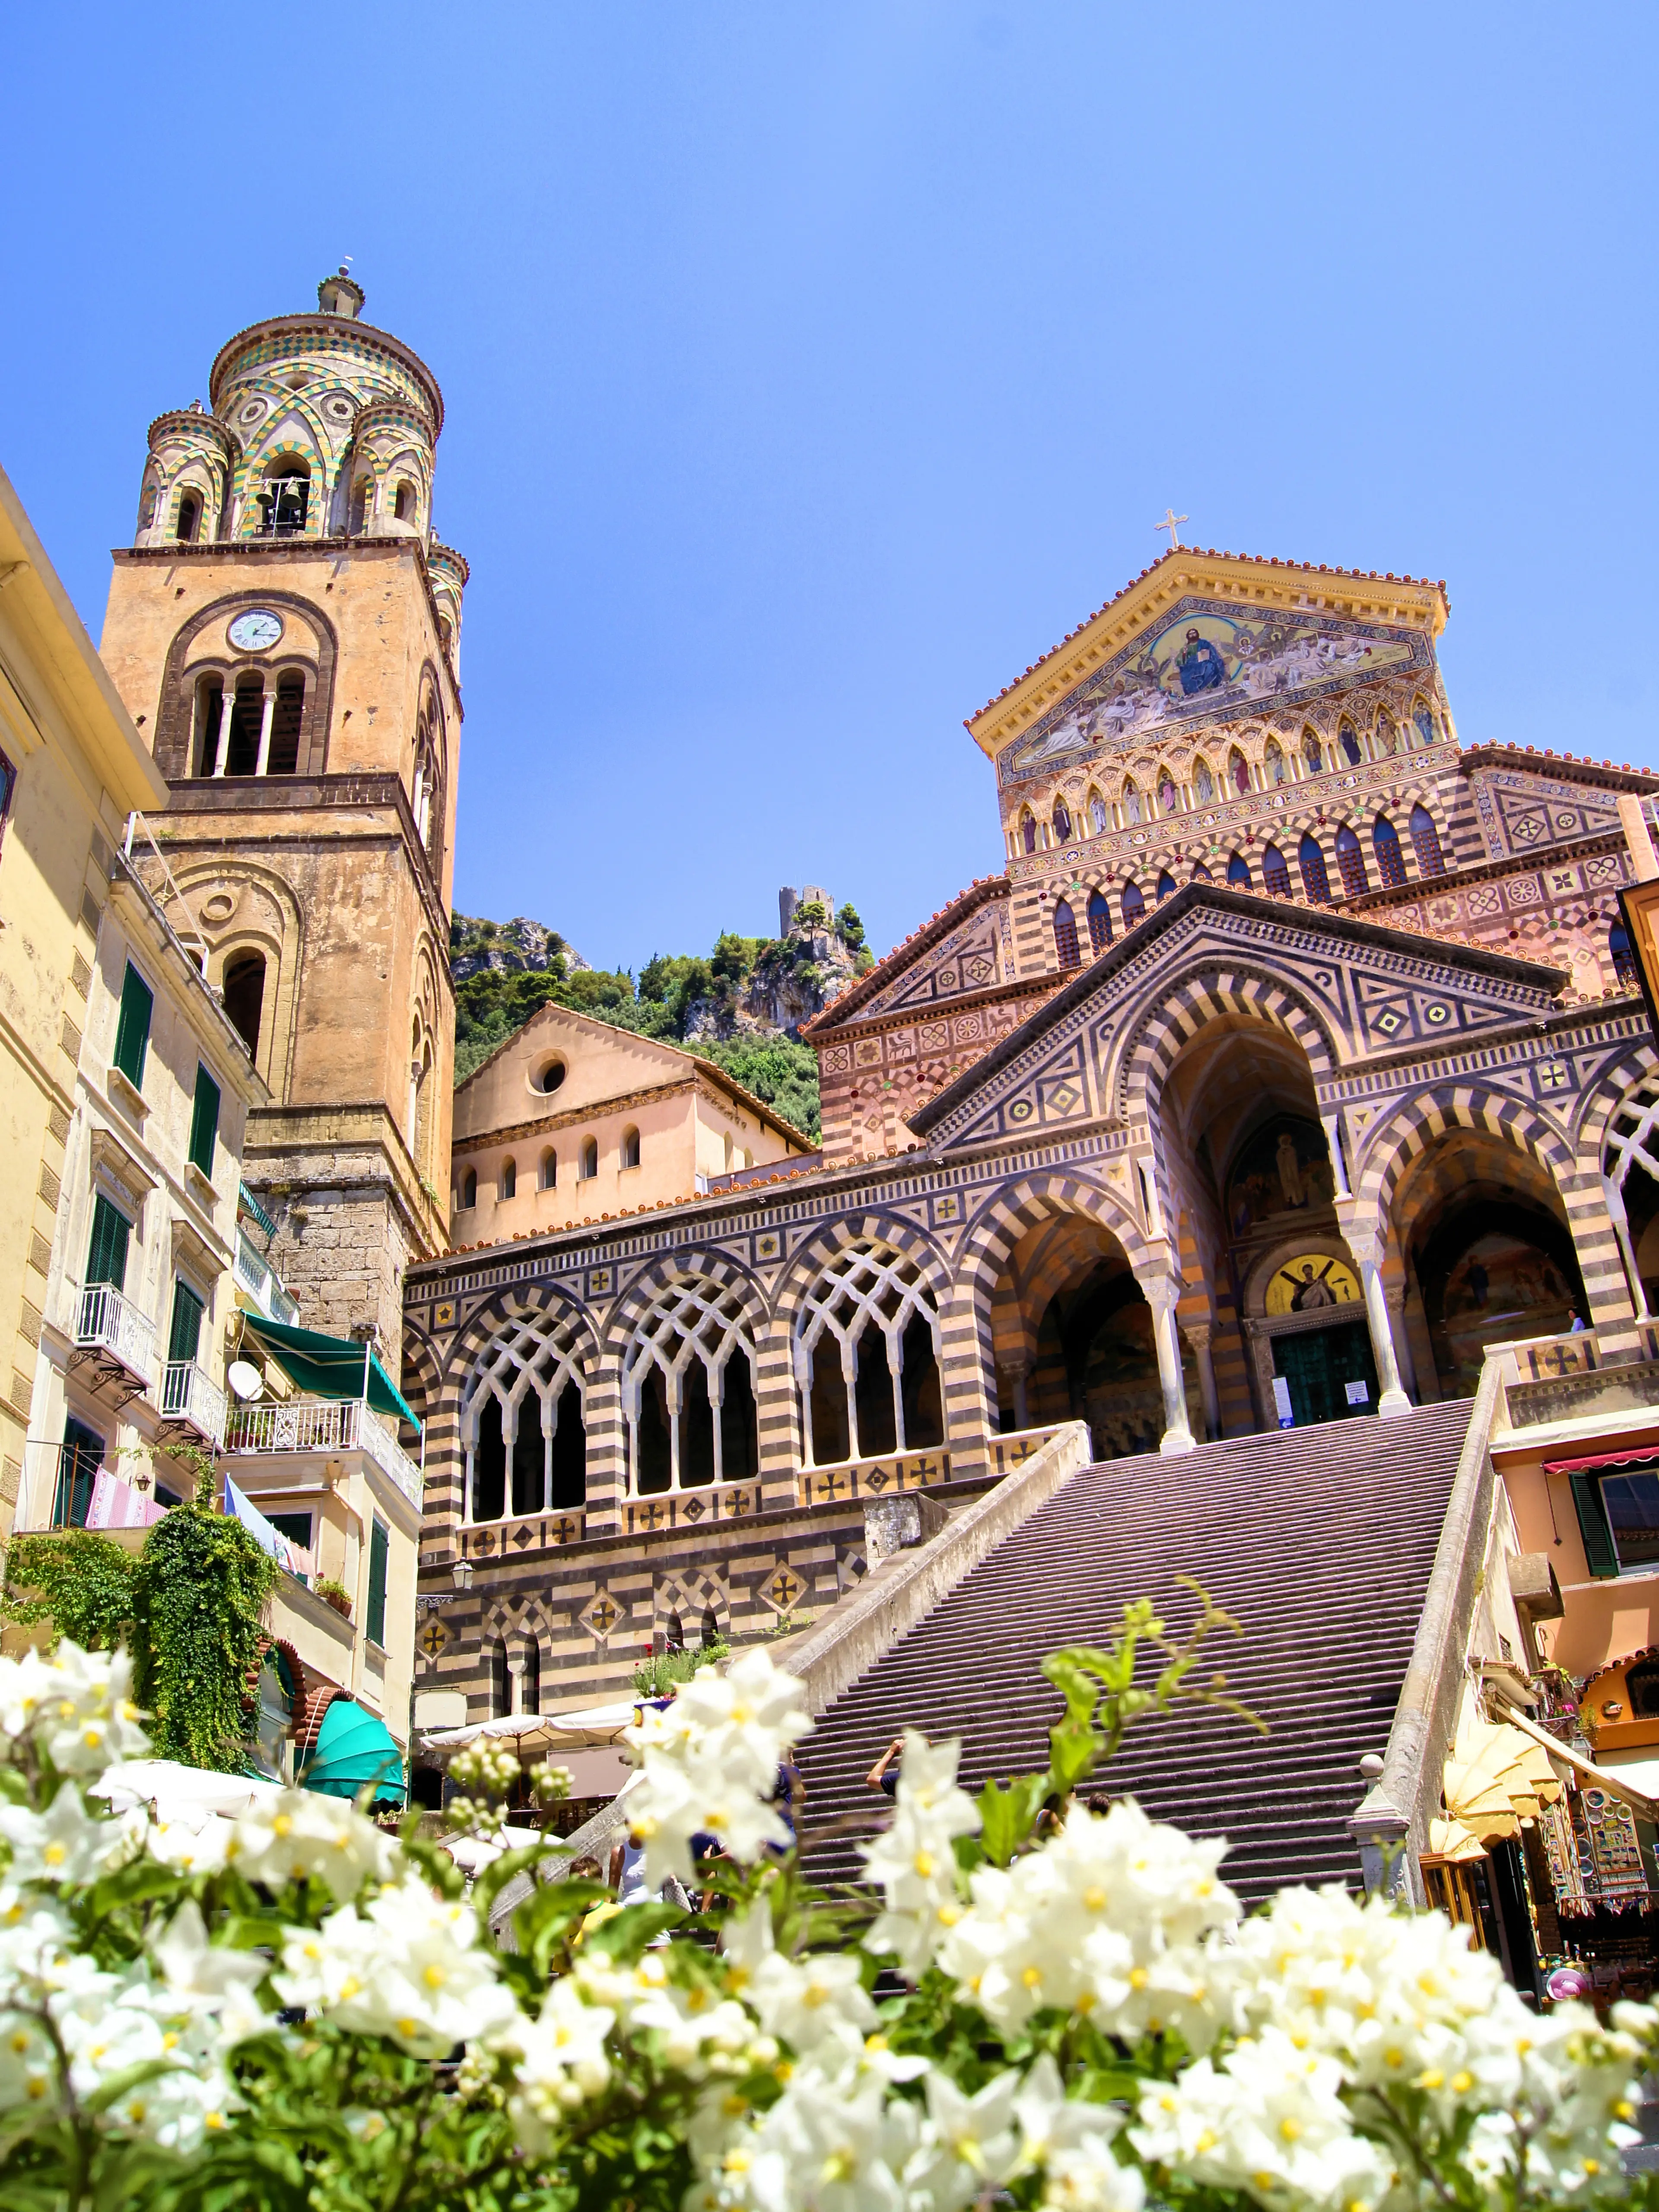 1-Day Local's Guide: Amalfi Coast Nightlife, Food and Wine Tour